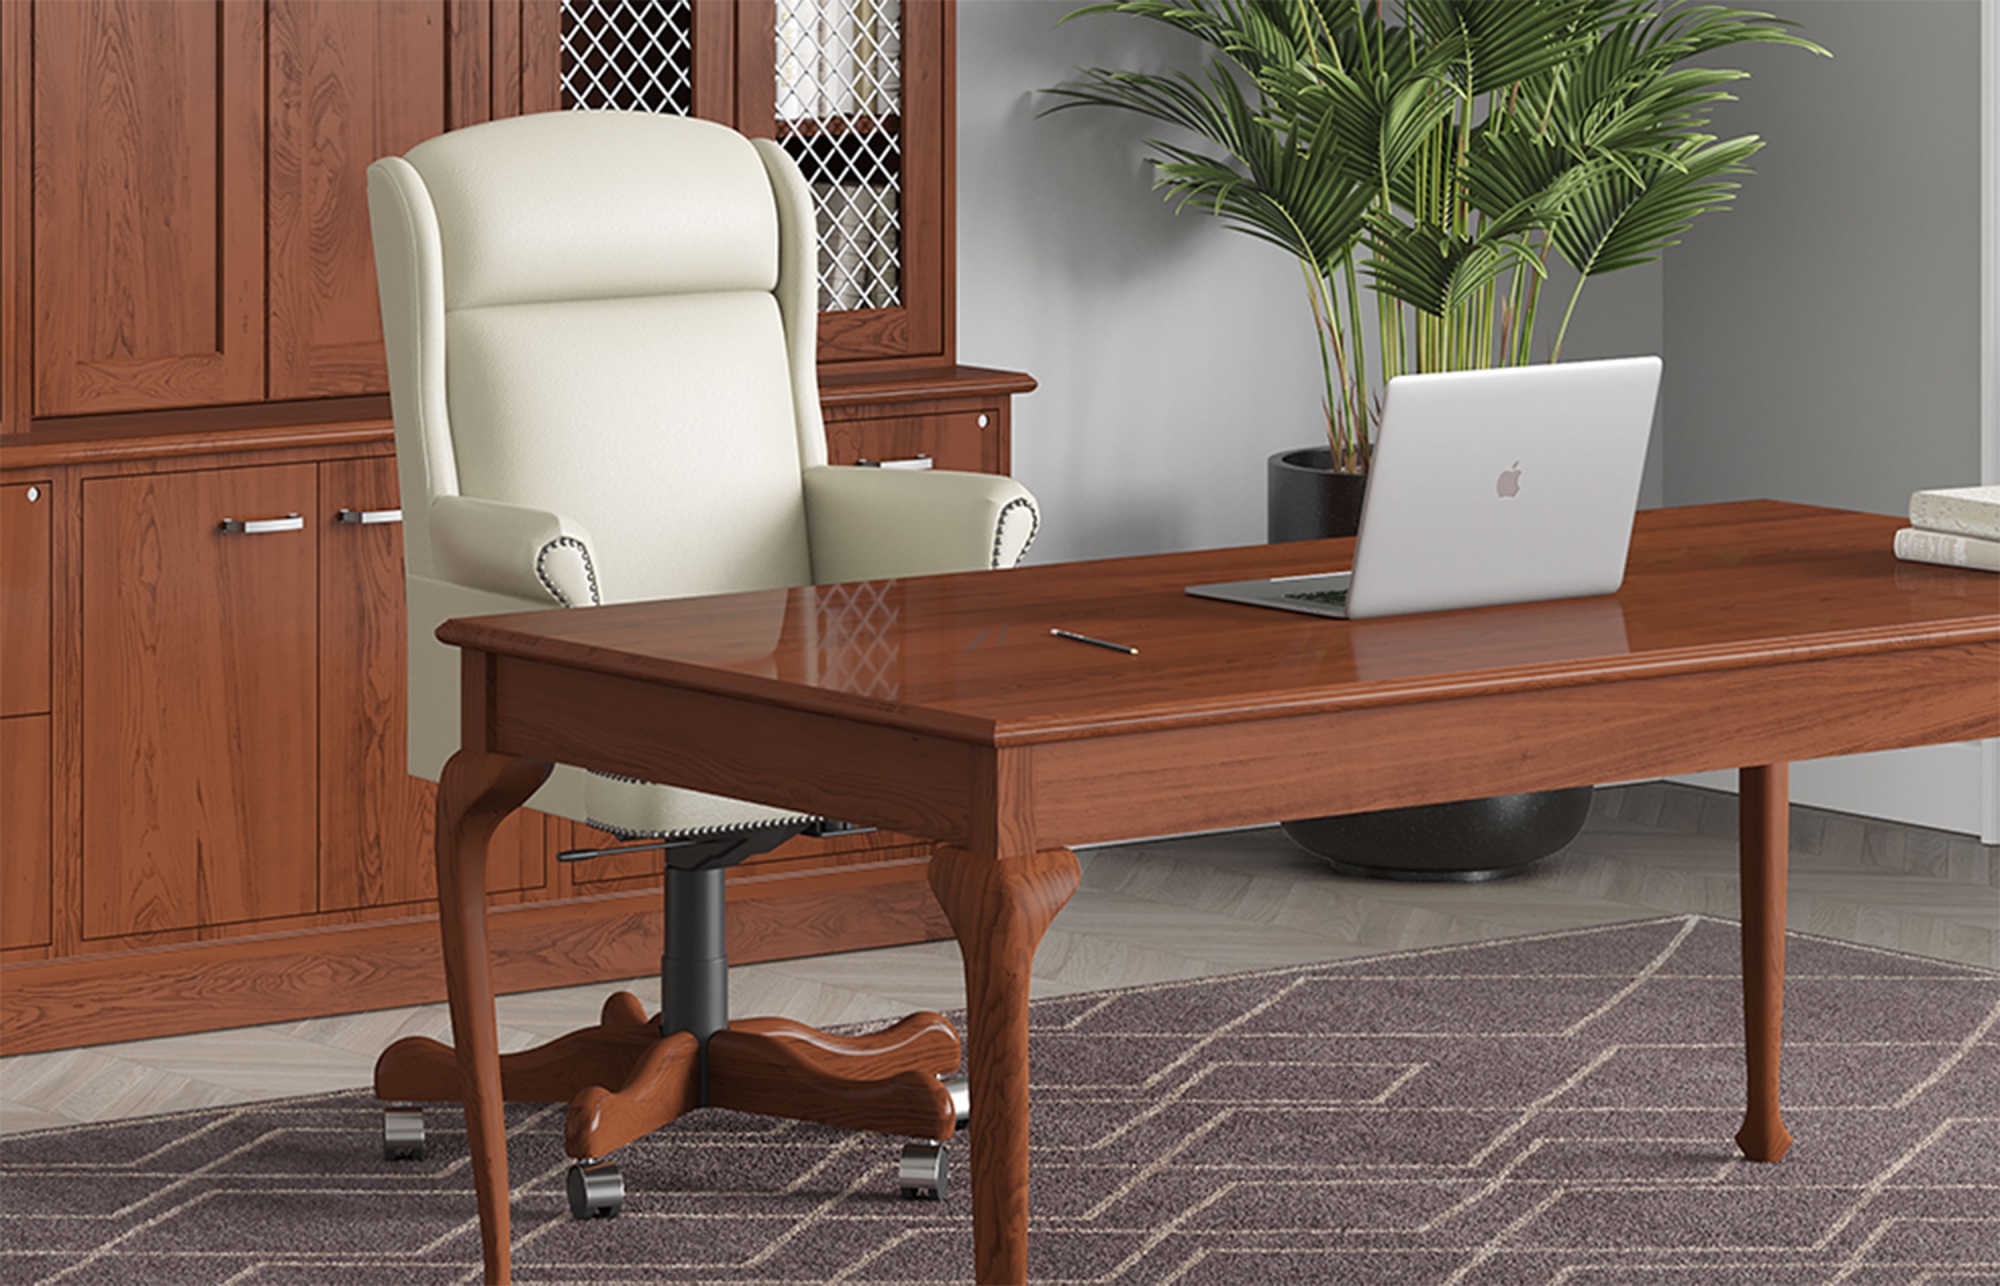 Indiana Furniture, Seating, Traditional splendor and elegant styling is showcased in Breman’s stately and timeless